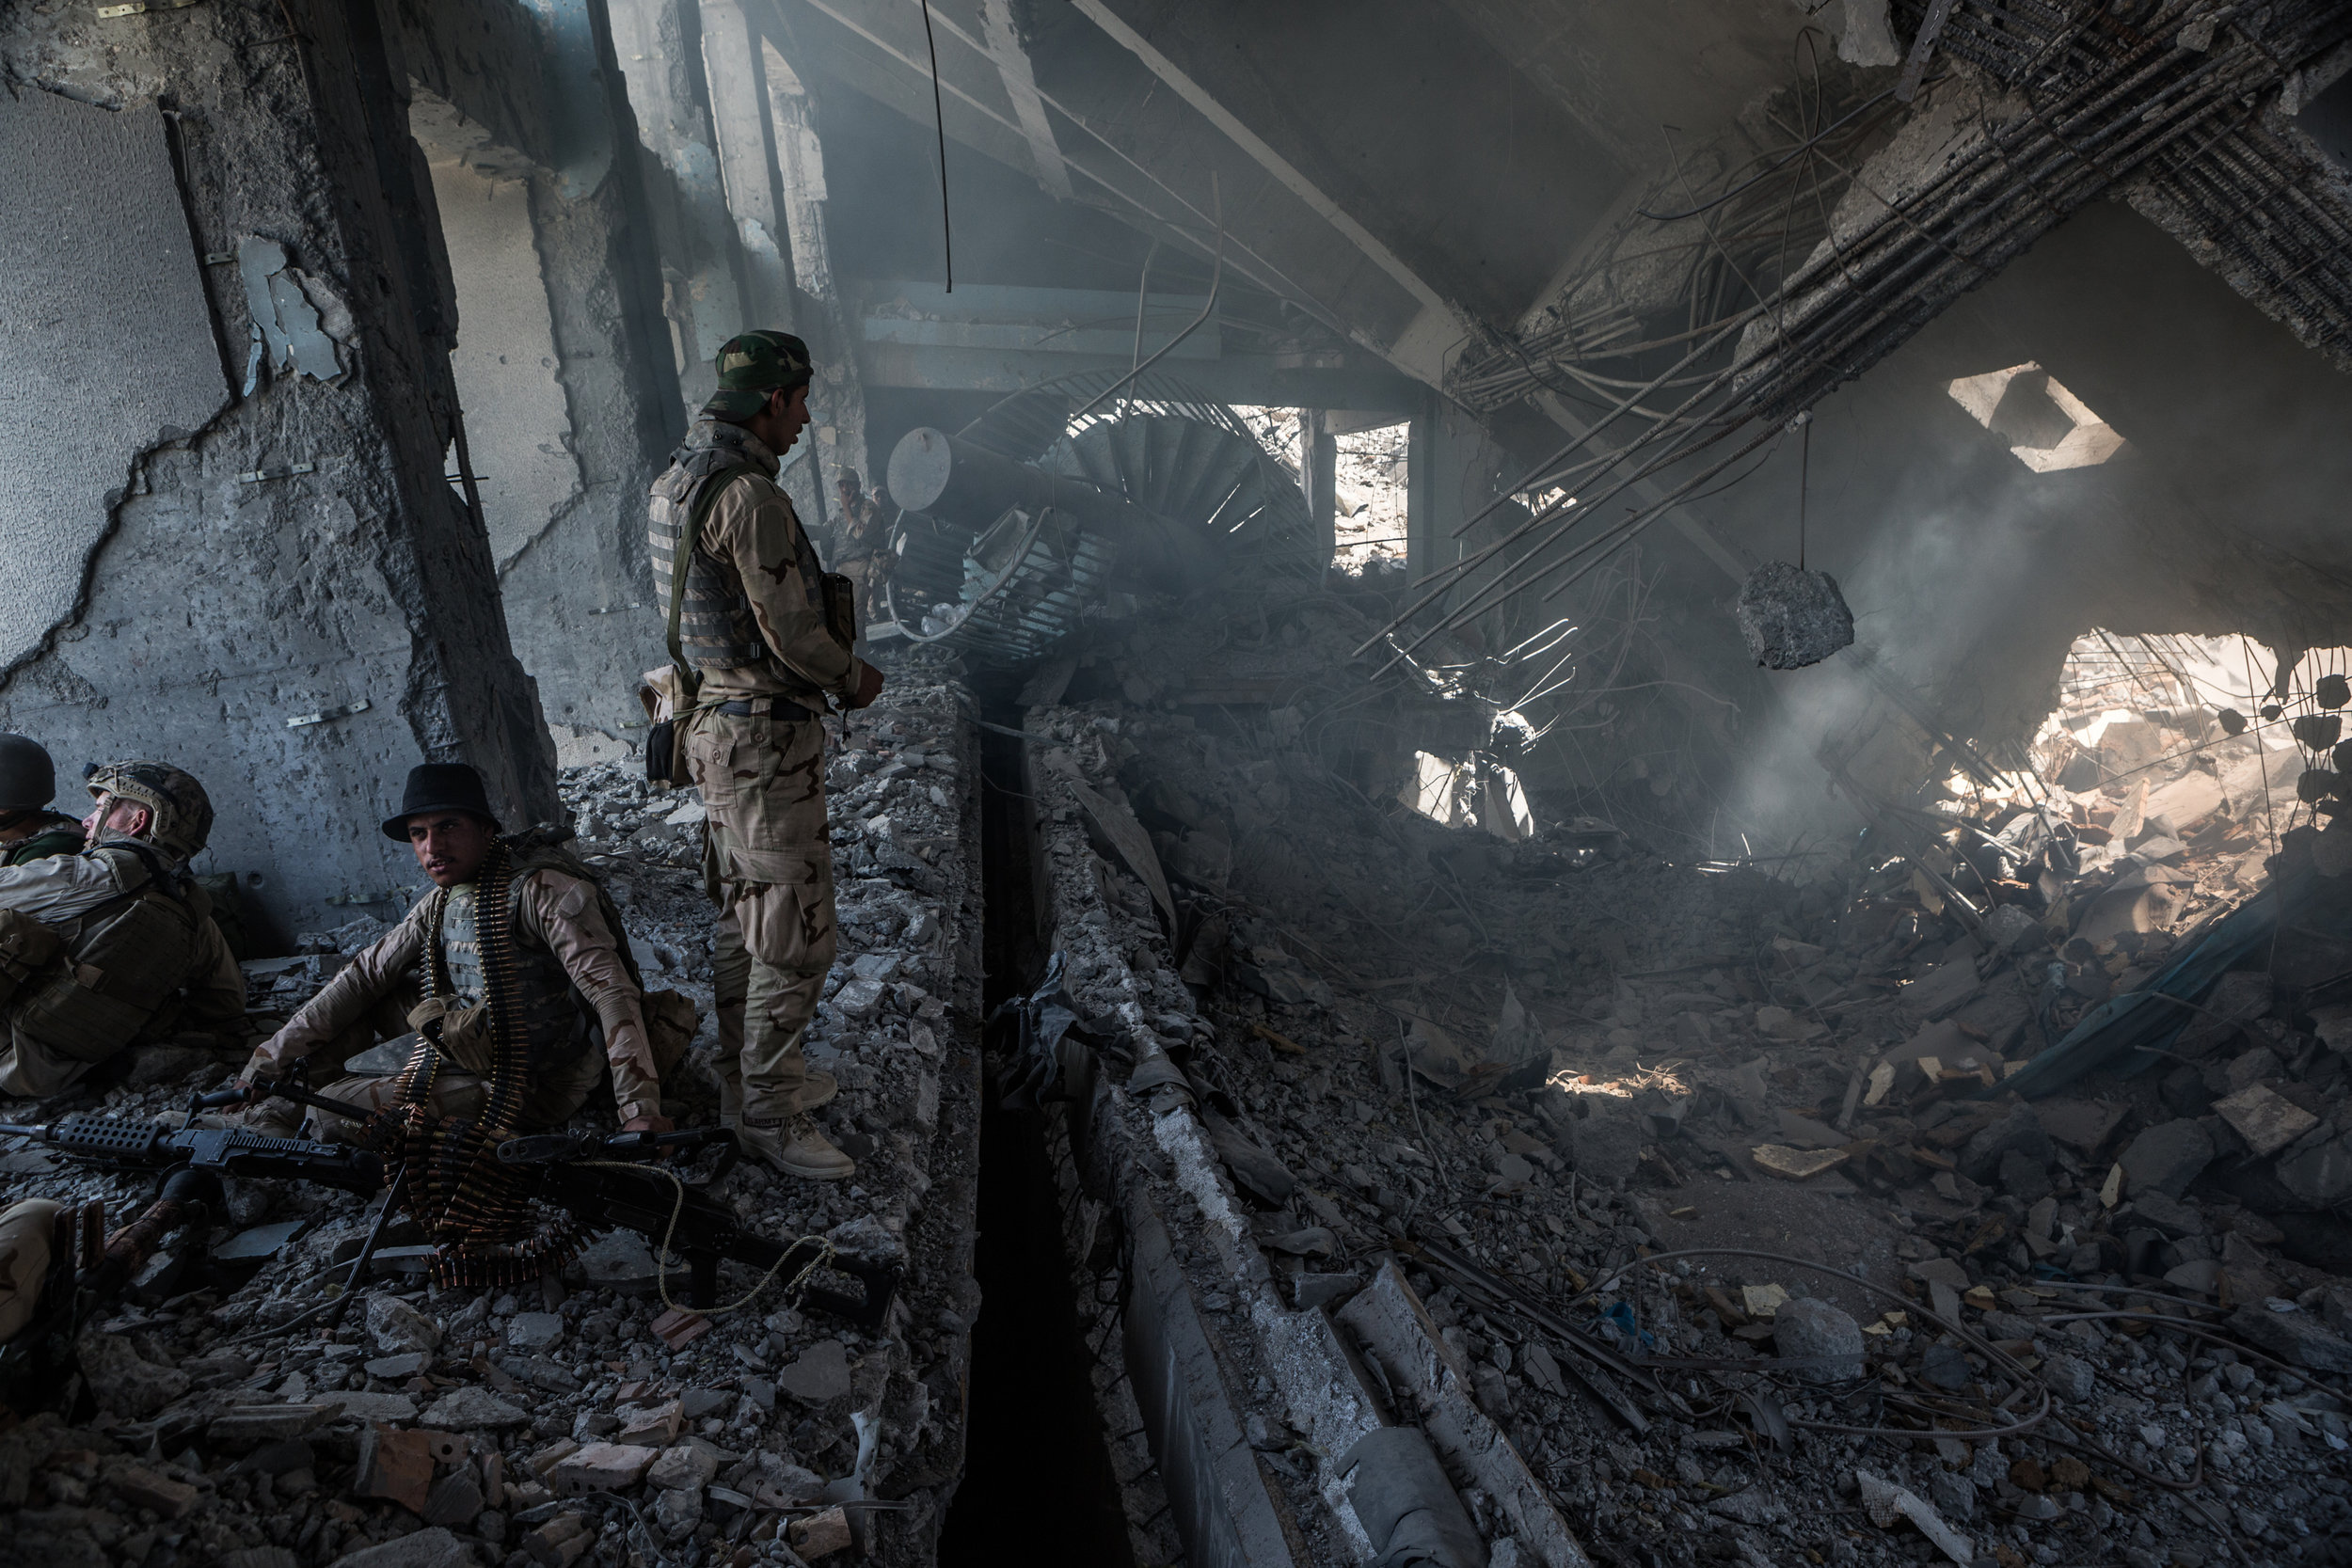  Members of the Iraqi army fortify a new position inside the remains of the Old Mosul Hotel in al-Shifa neighborhood during a newly launched assault to reclaim the last remaining districts of western Mosul from the Islamic State. 